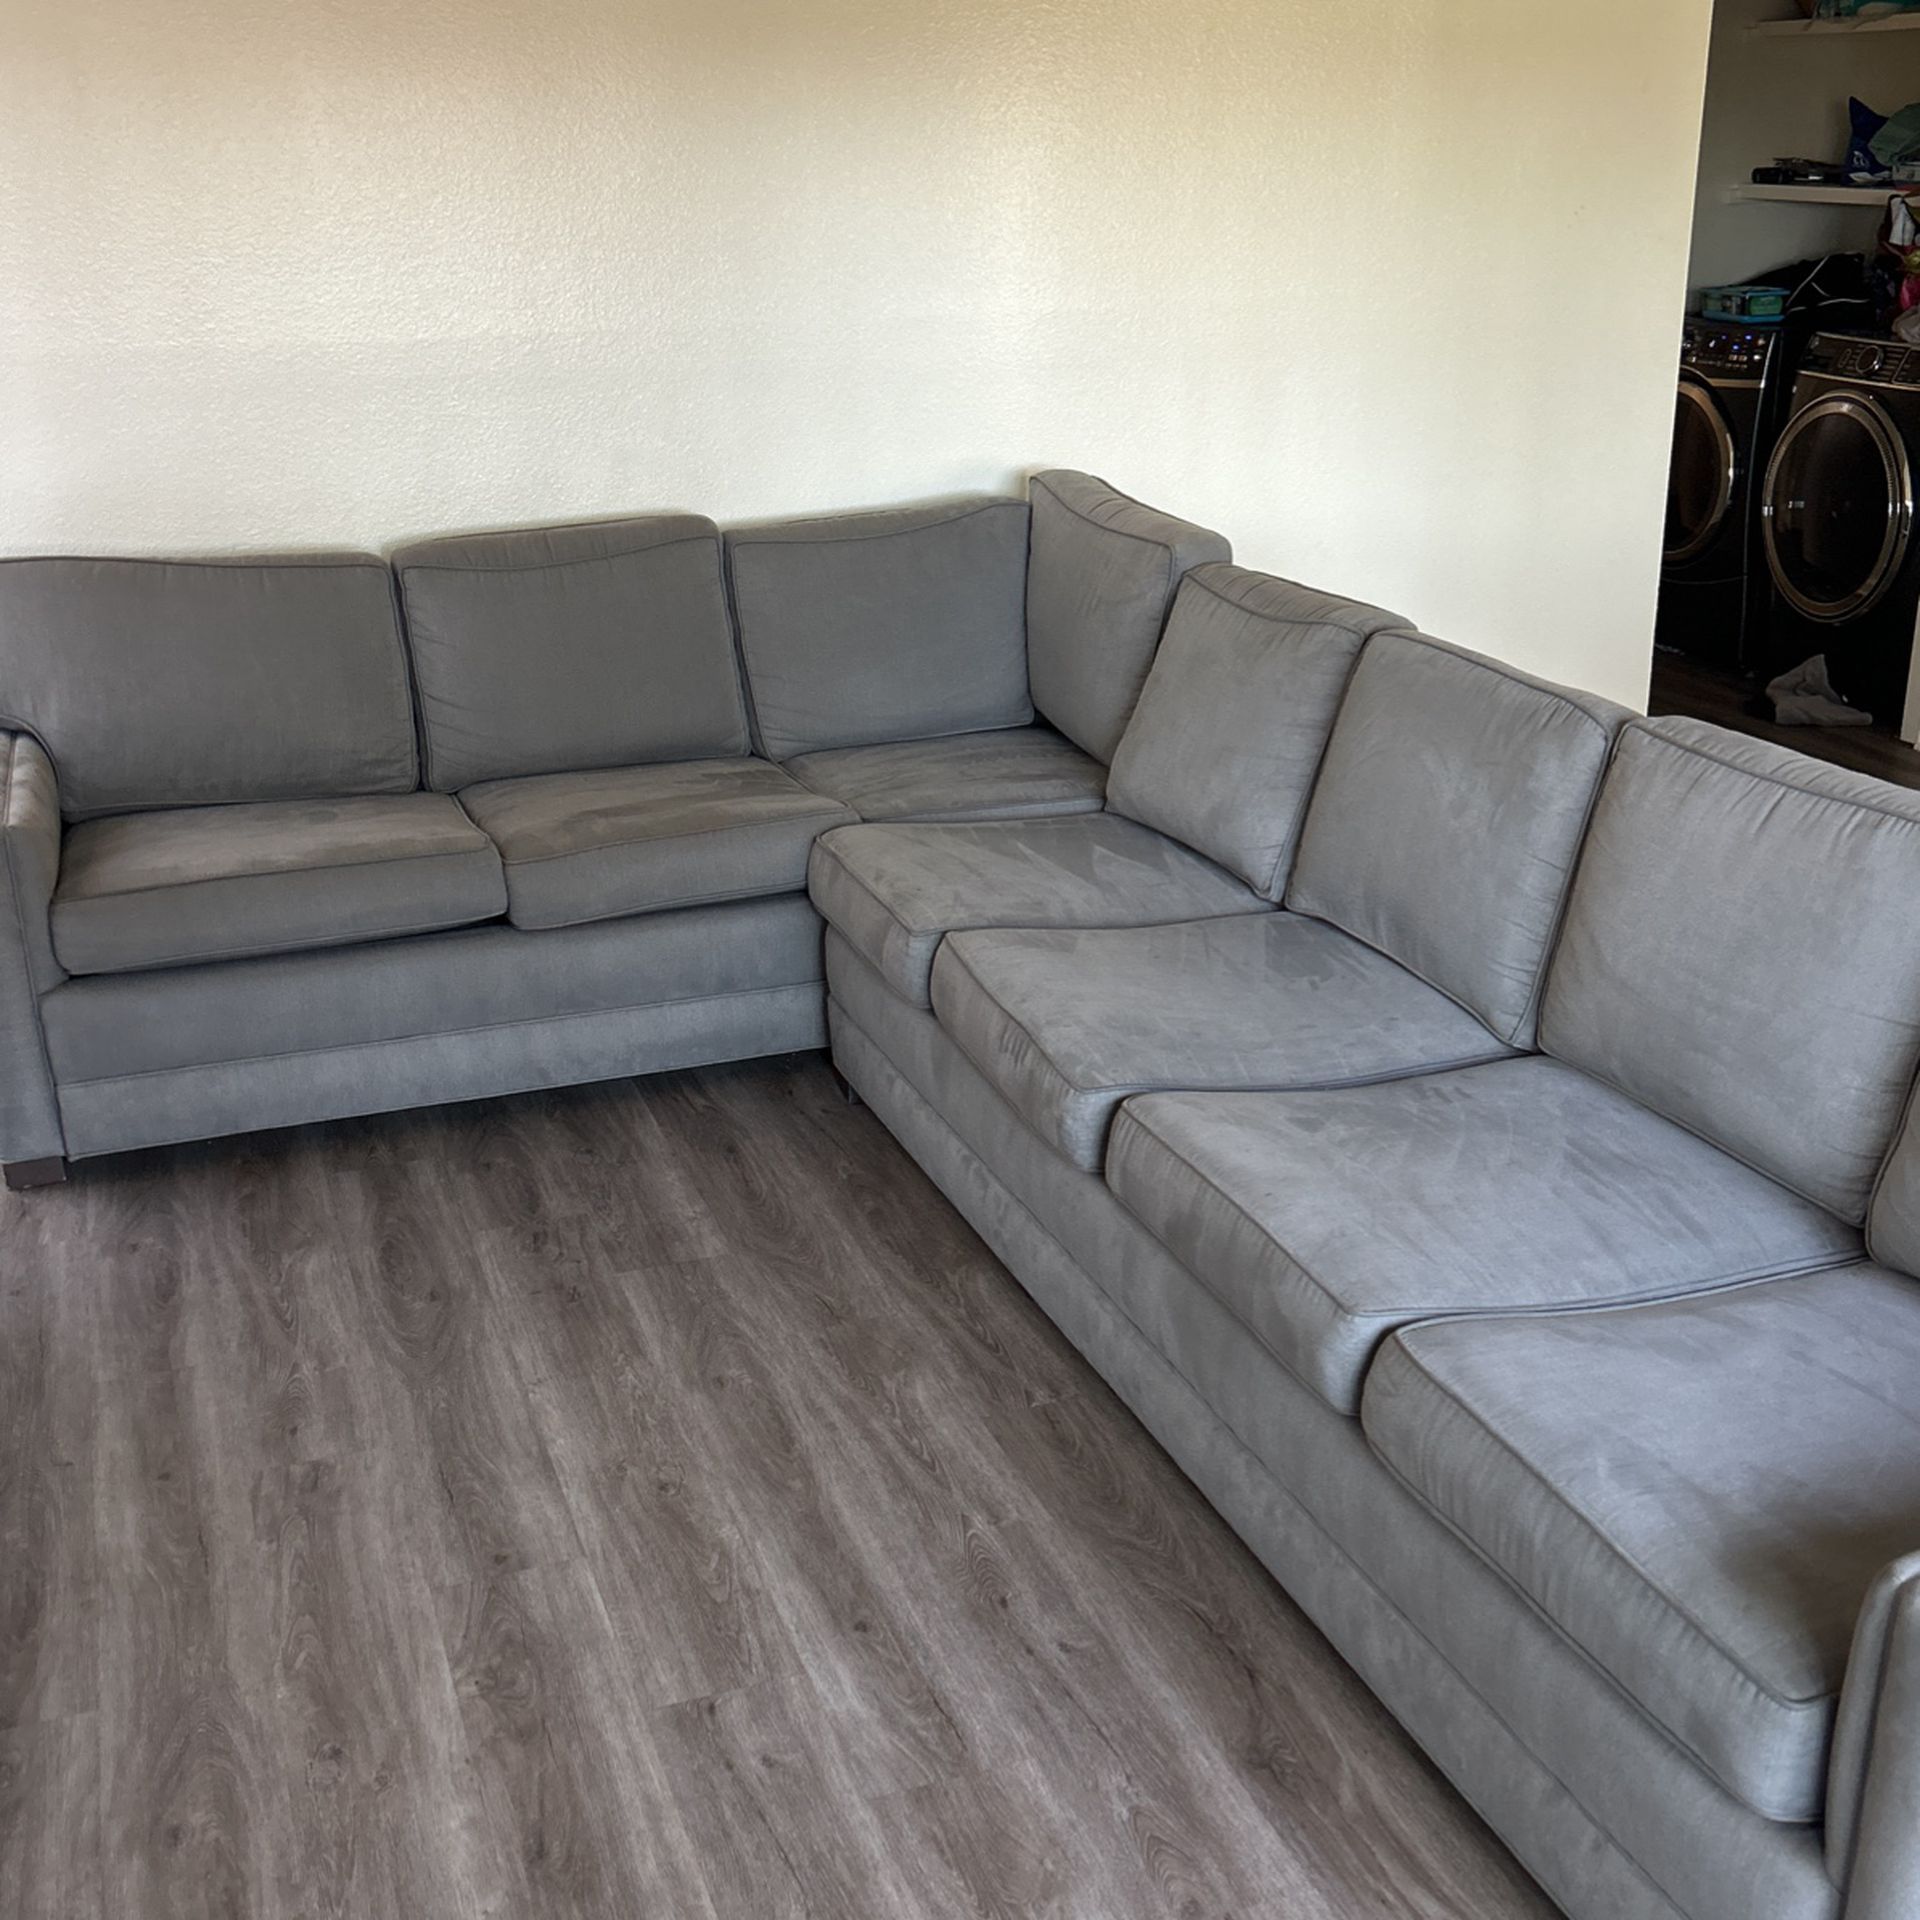 Couch L - shaped sectional 